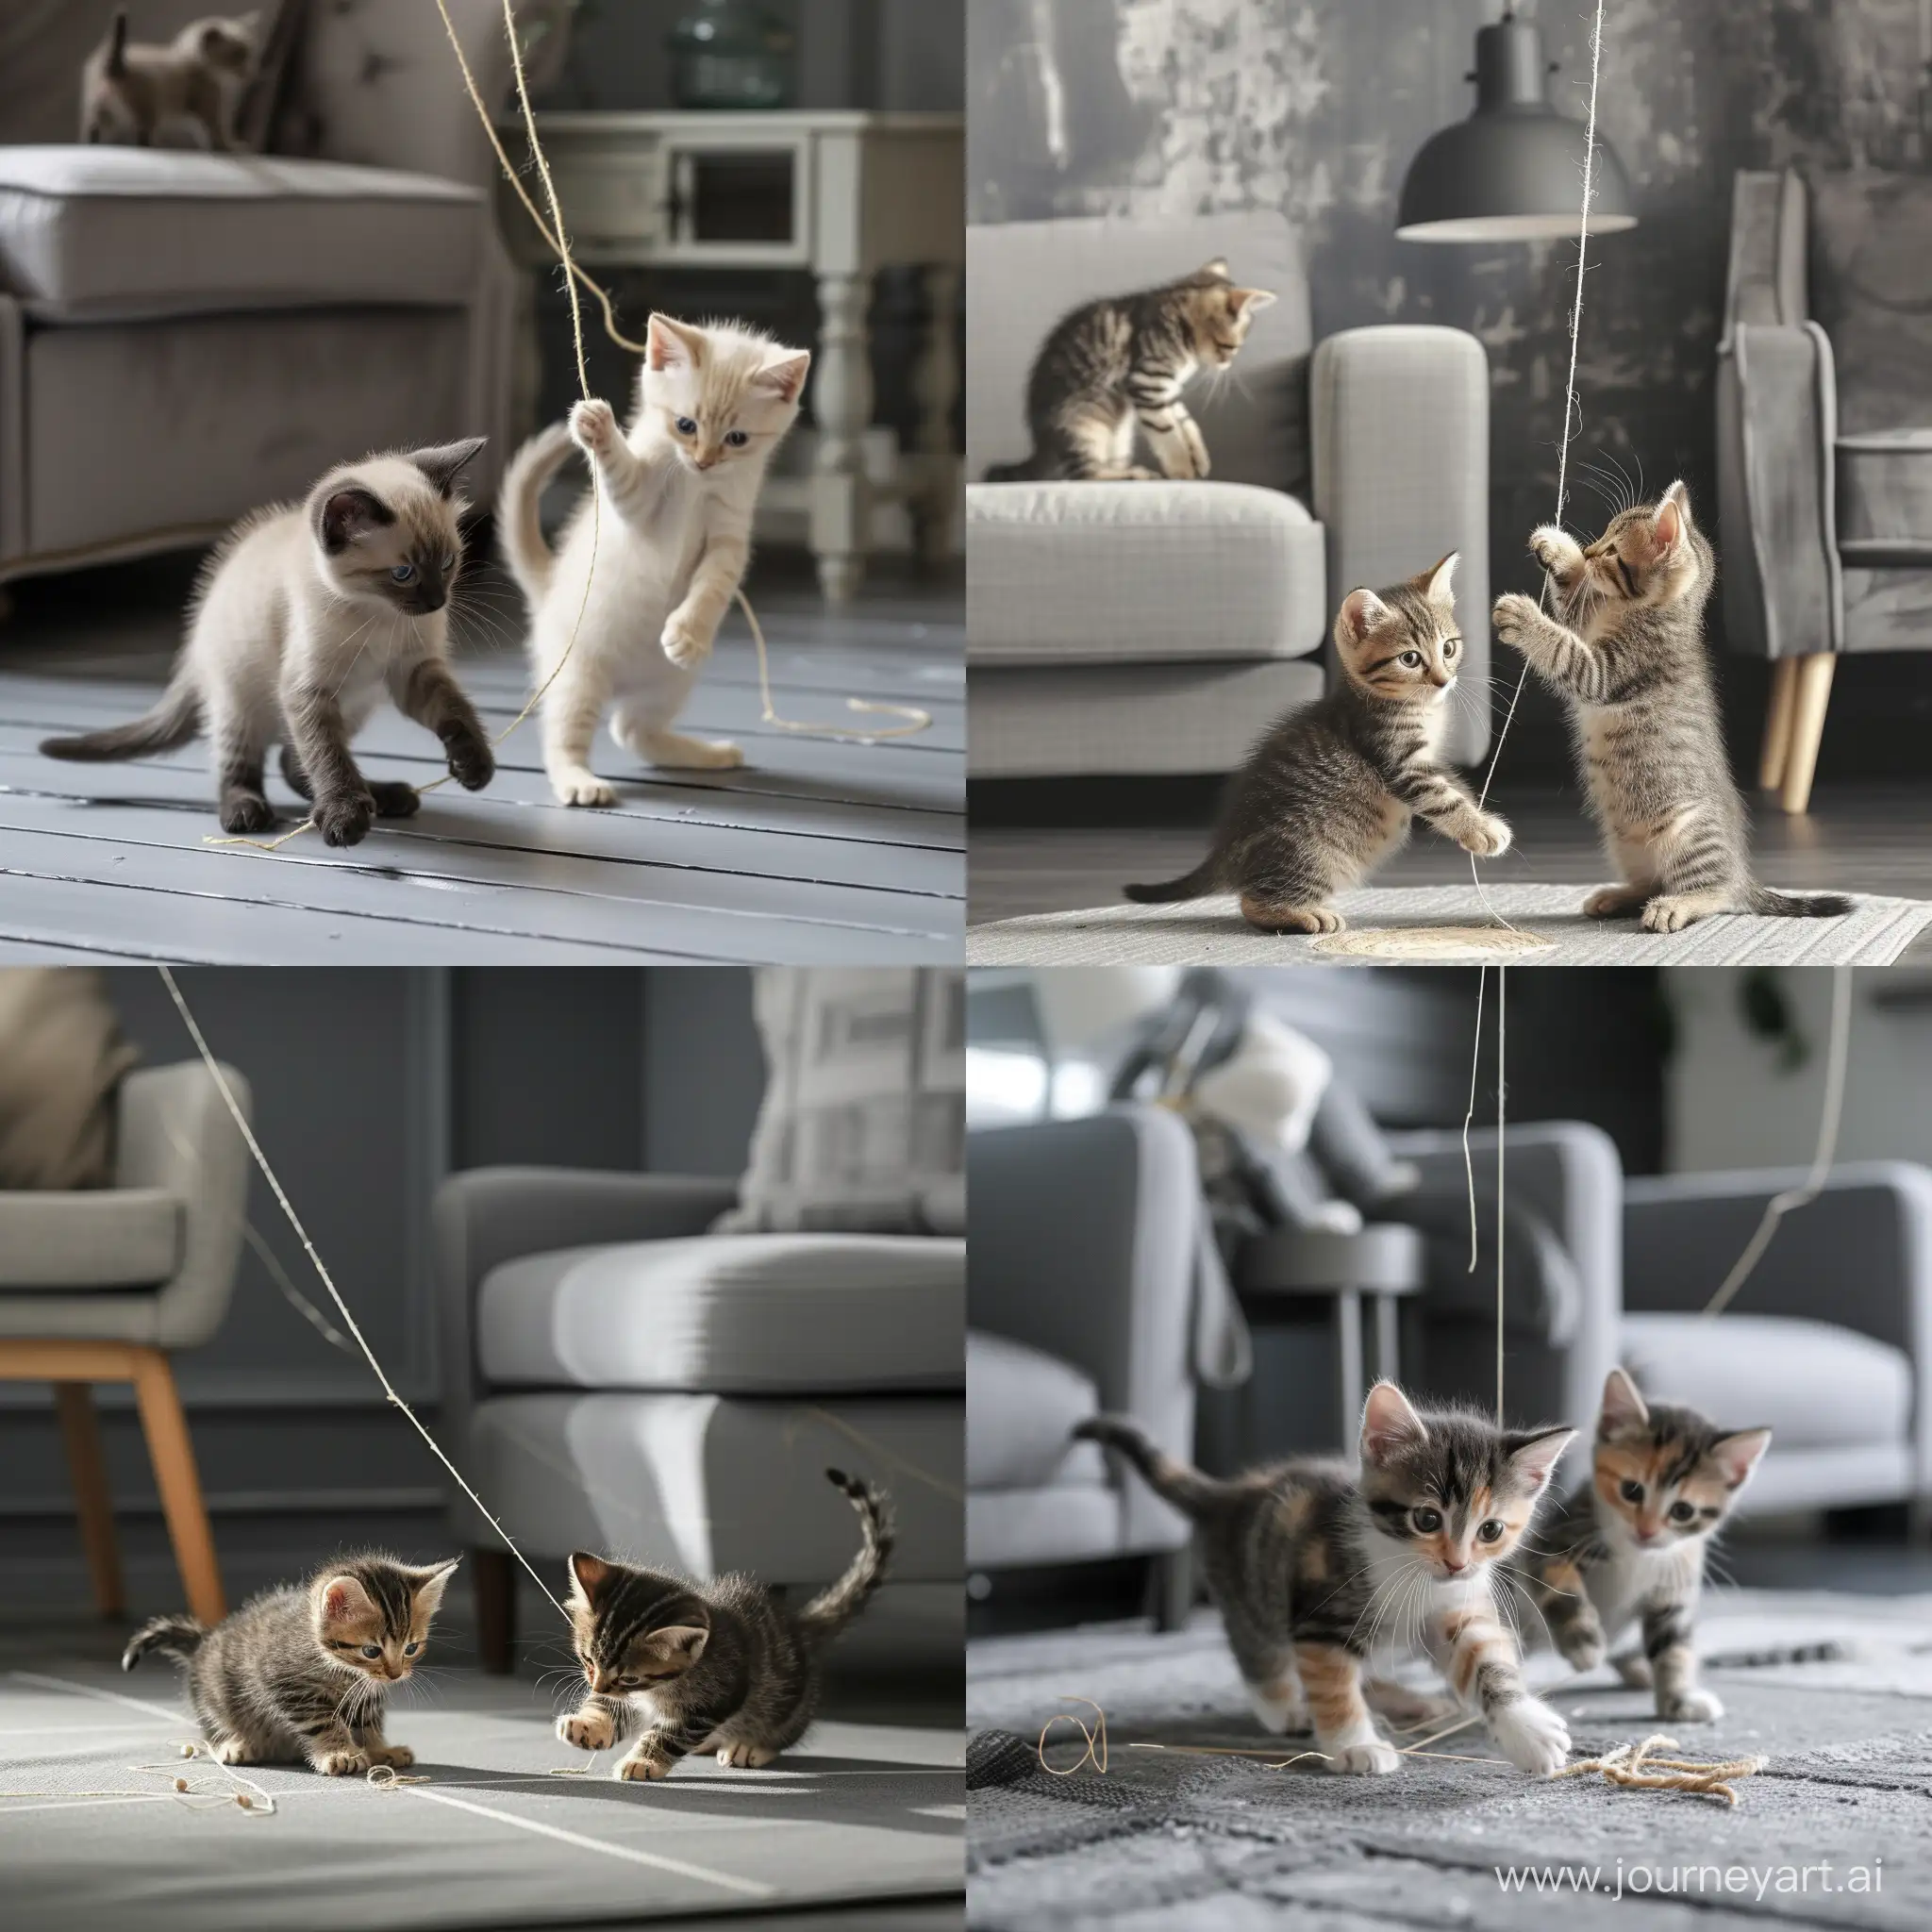 Kittens playing with string in a house with grey furniture